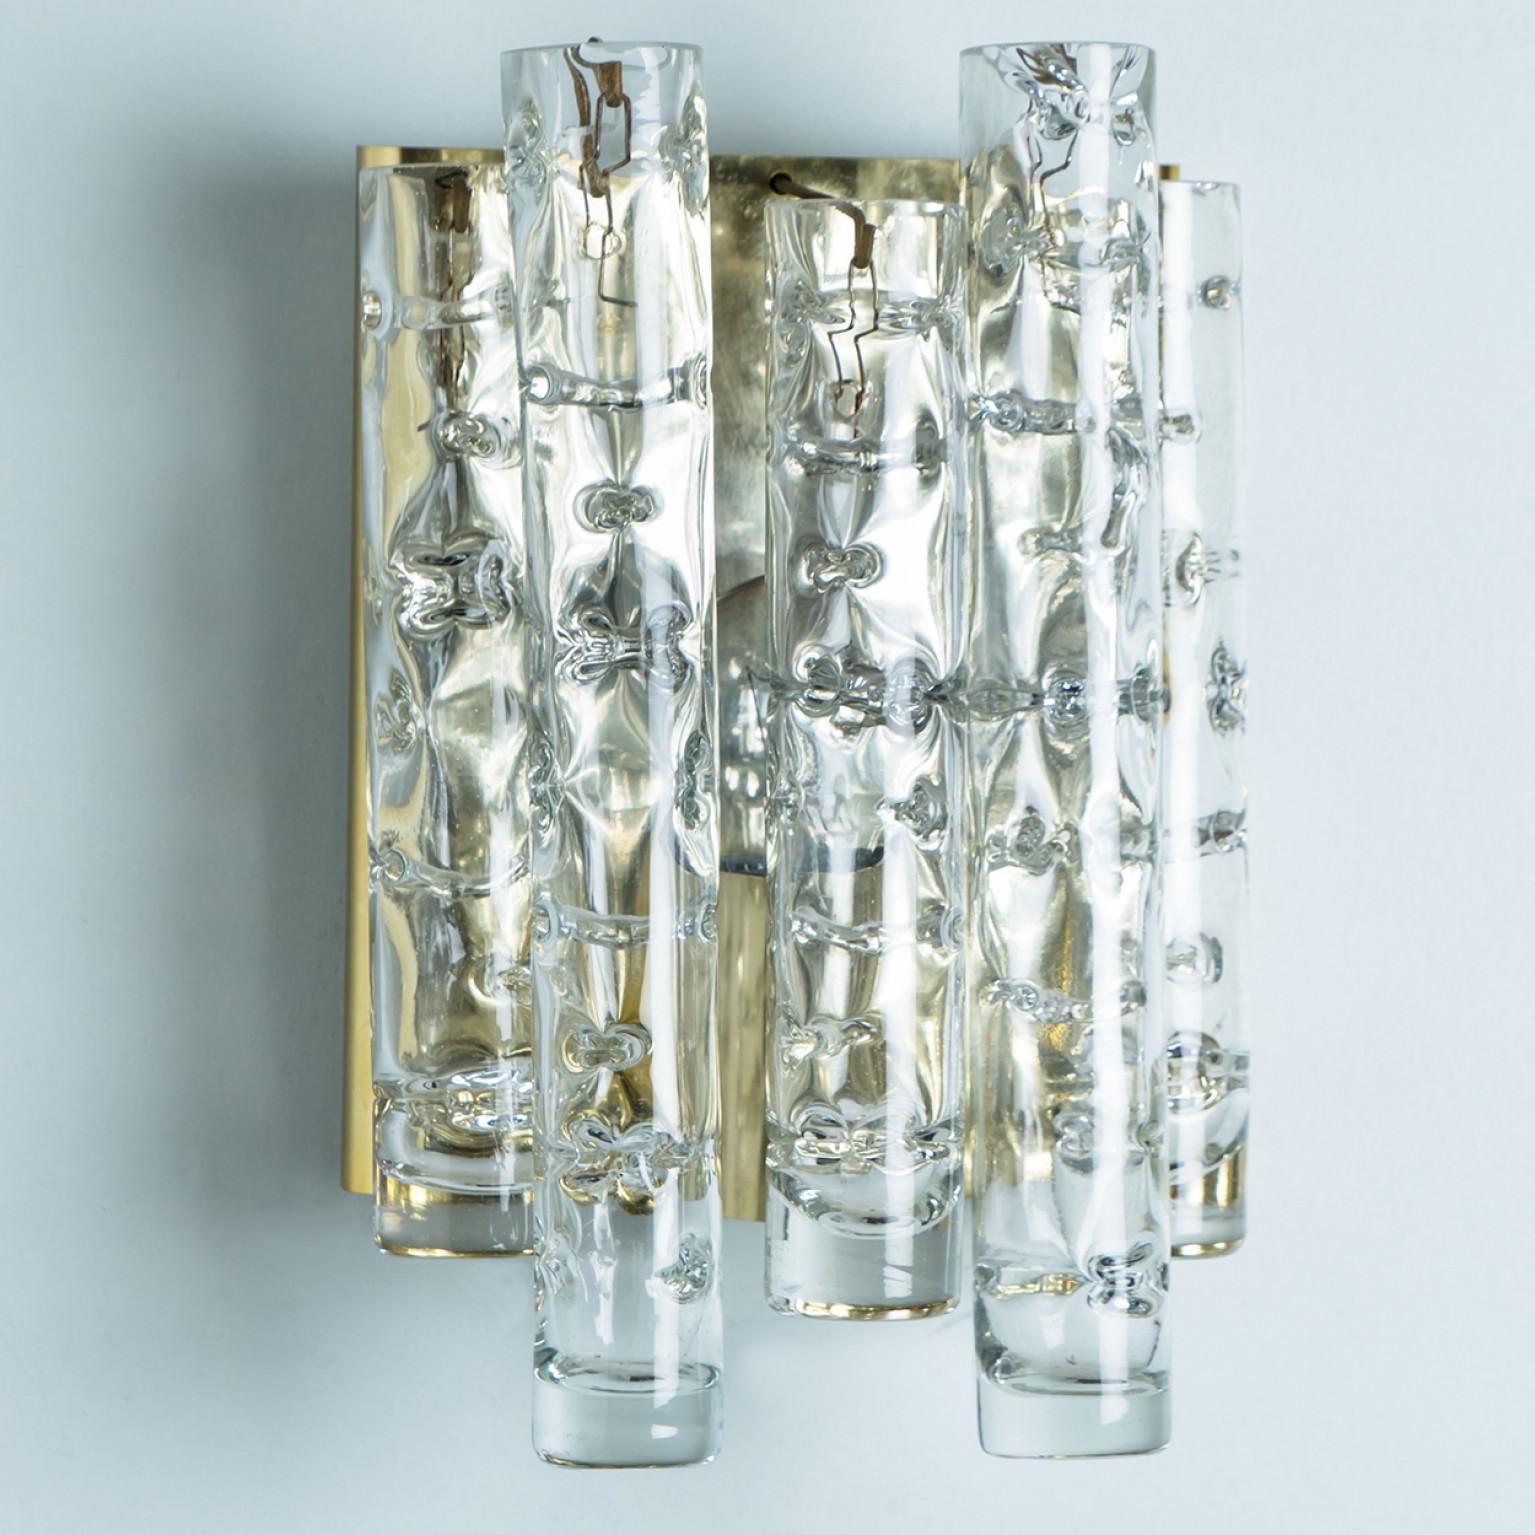 Wonderful hand blown Doria wall lamps. Manufactured in the 1960s. With textured and clear and gold structured glass pipes.
The stylish elegance of this lamp suits many environments, from mid century to Hollywood Regency, from Danish modern to Space